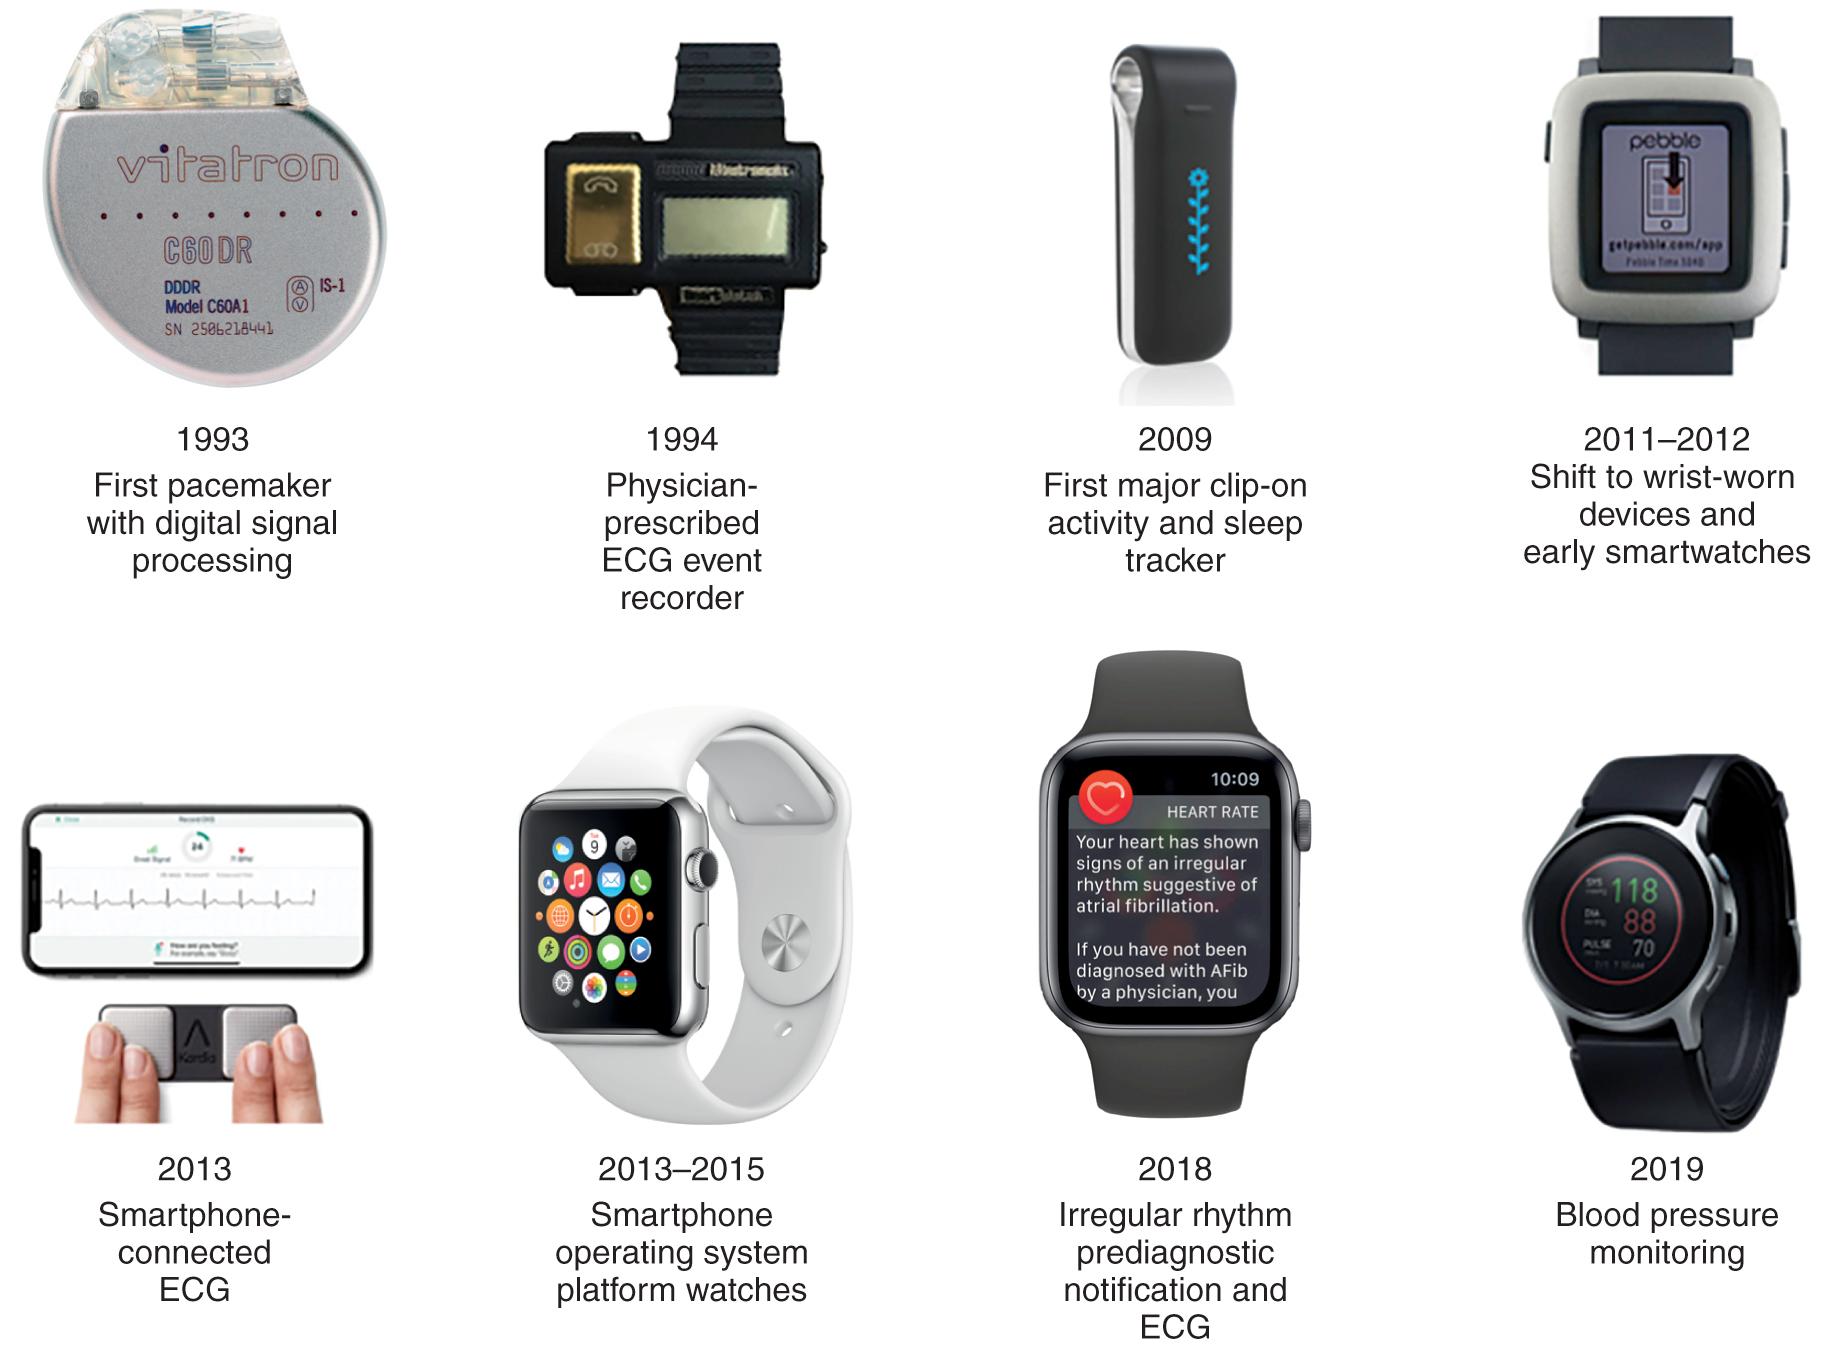 FIGURE 12.1, Timeline of wearable devices. (From Vitatron International; BioTelemetry, Inc; Google; AliveCor. Screenshots reprinted with permission from Apple Inc. HeartGuide image courtesy of OMRON Healthcare, Inc.)